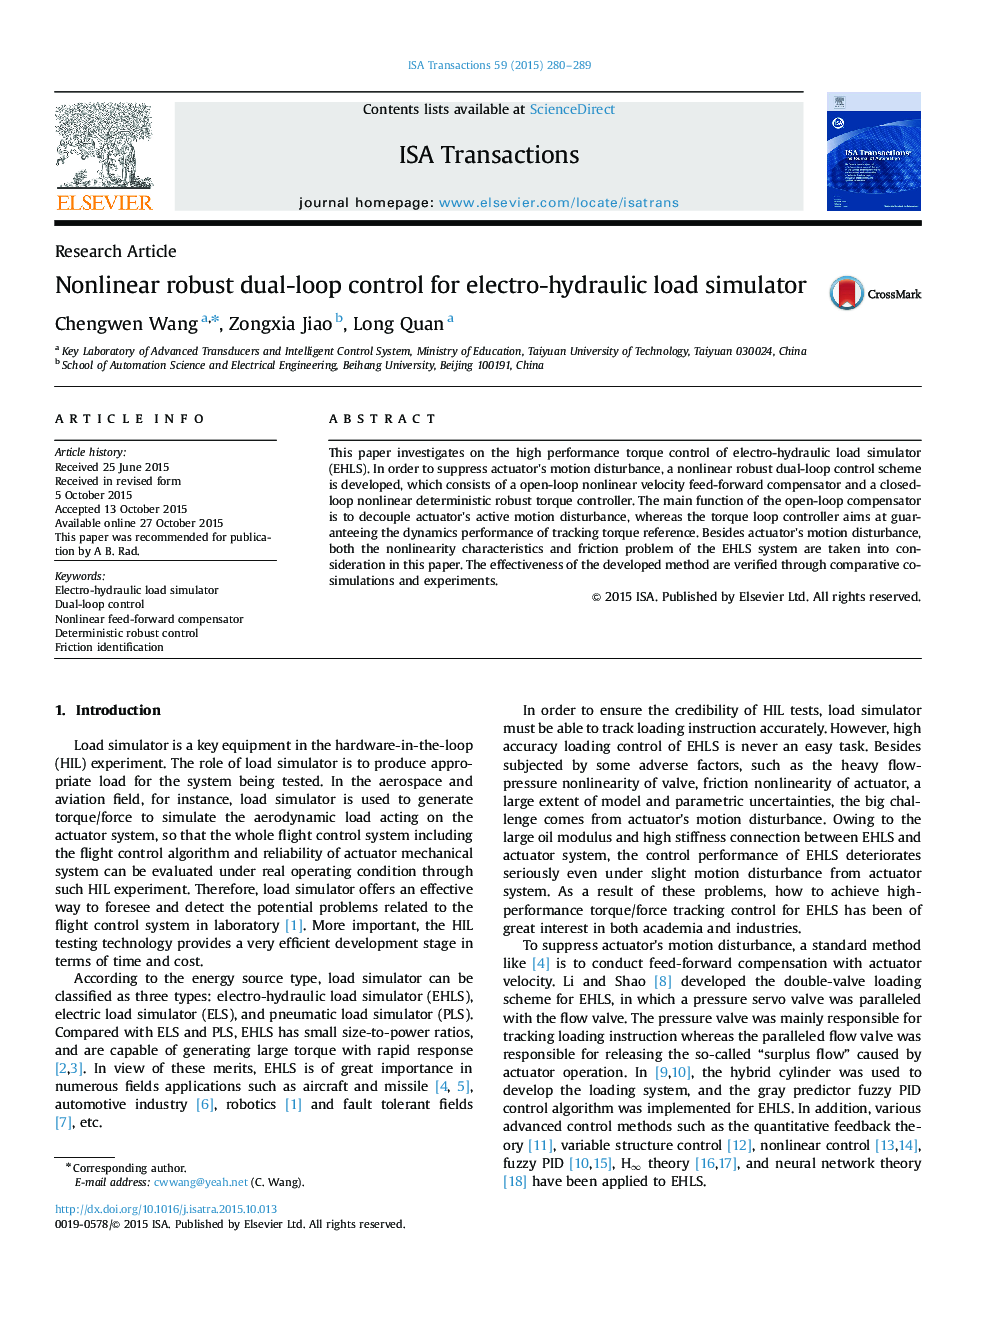 Research ArticleNonlinear robust dual-loop control for electro-hydraulic load simulator